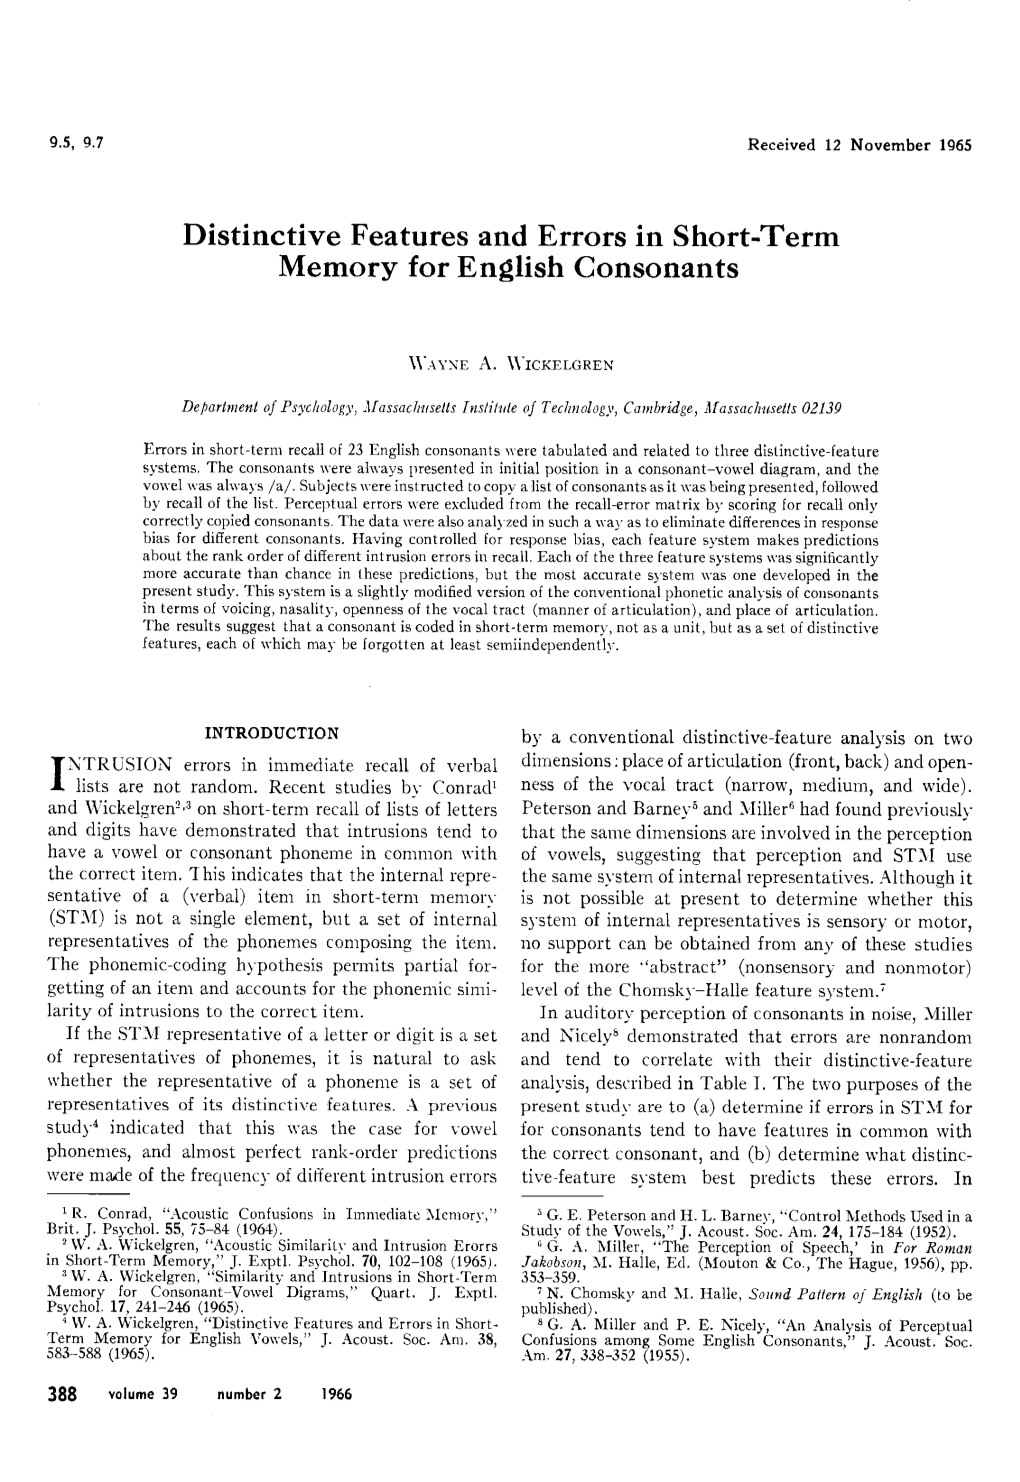 Distinctive Features and Errors in Short-Term Memory for English Consonants